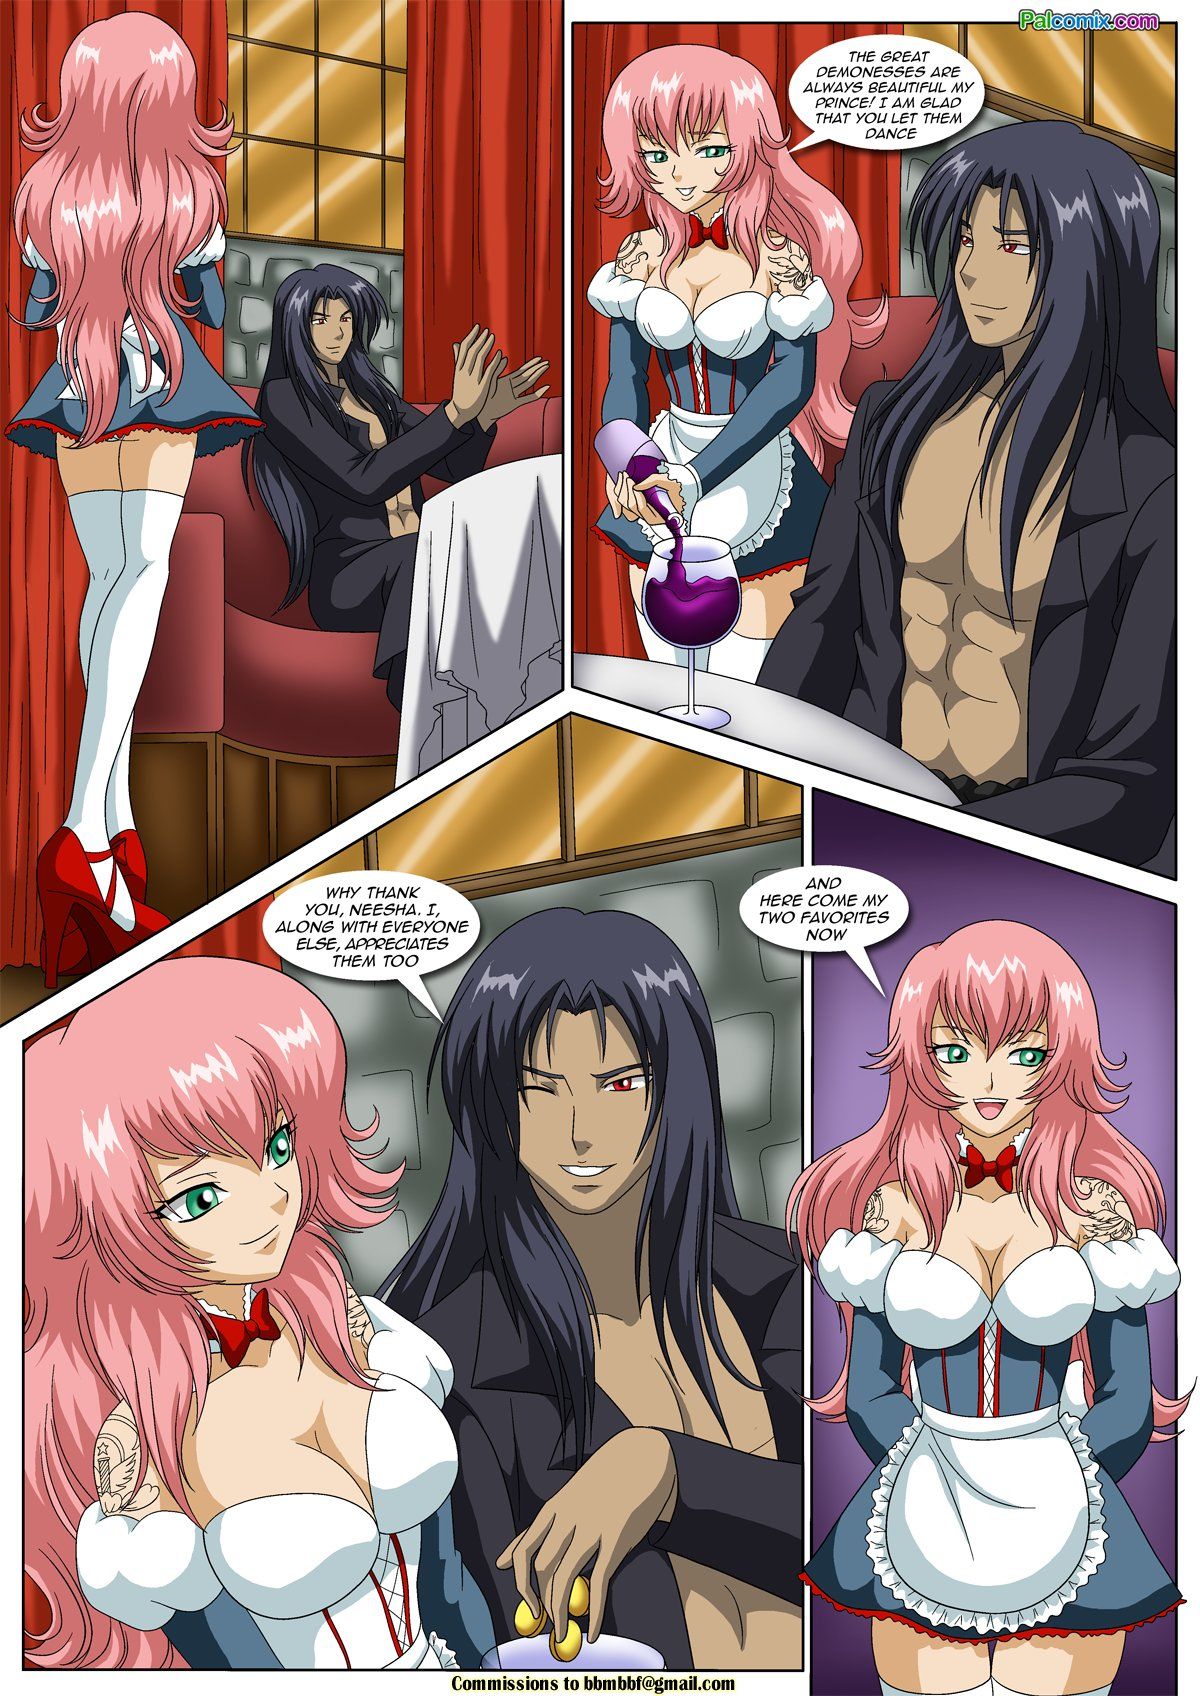 The Carnal Kingdom 6 - Angels and Demons page 5